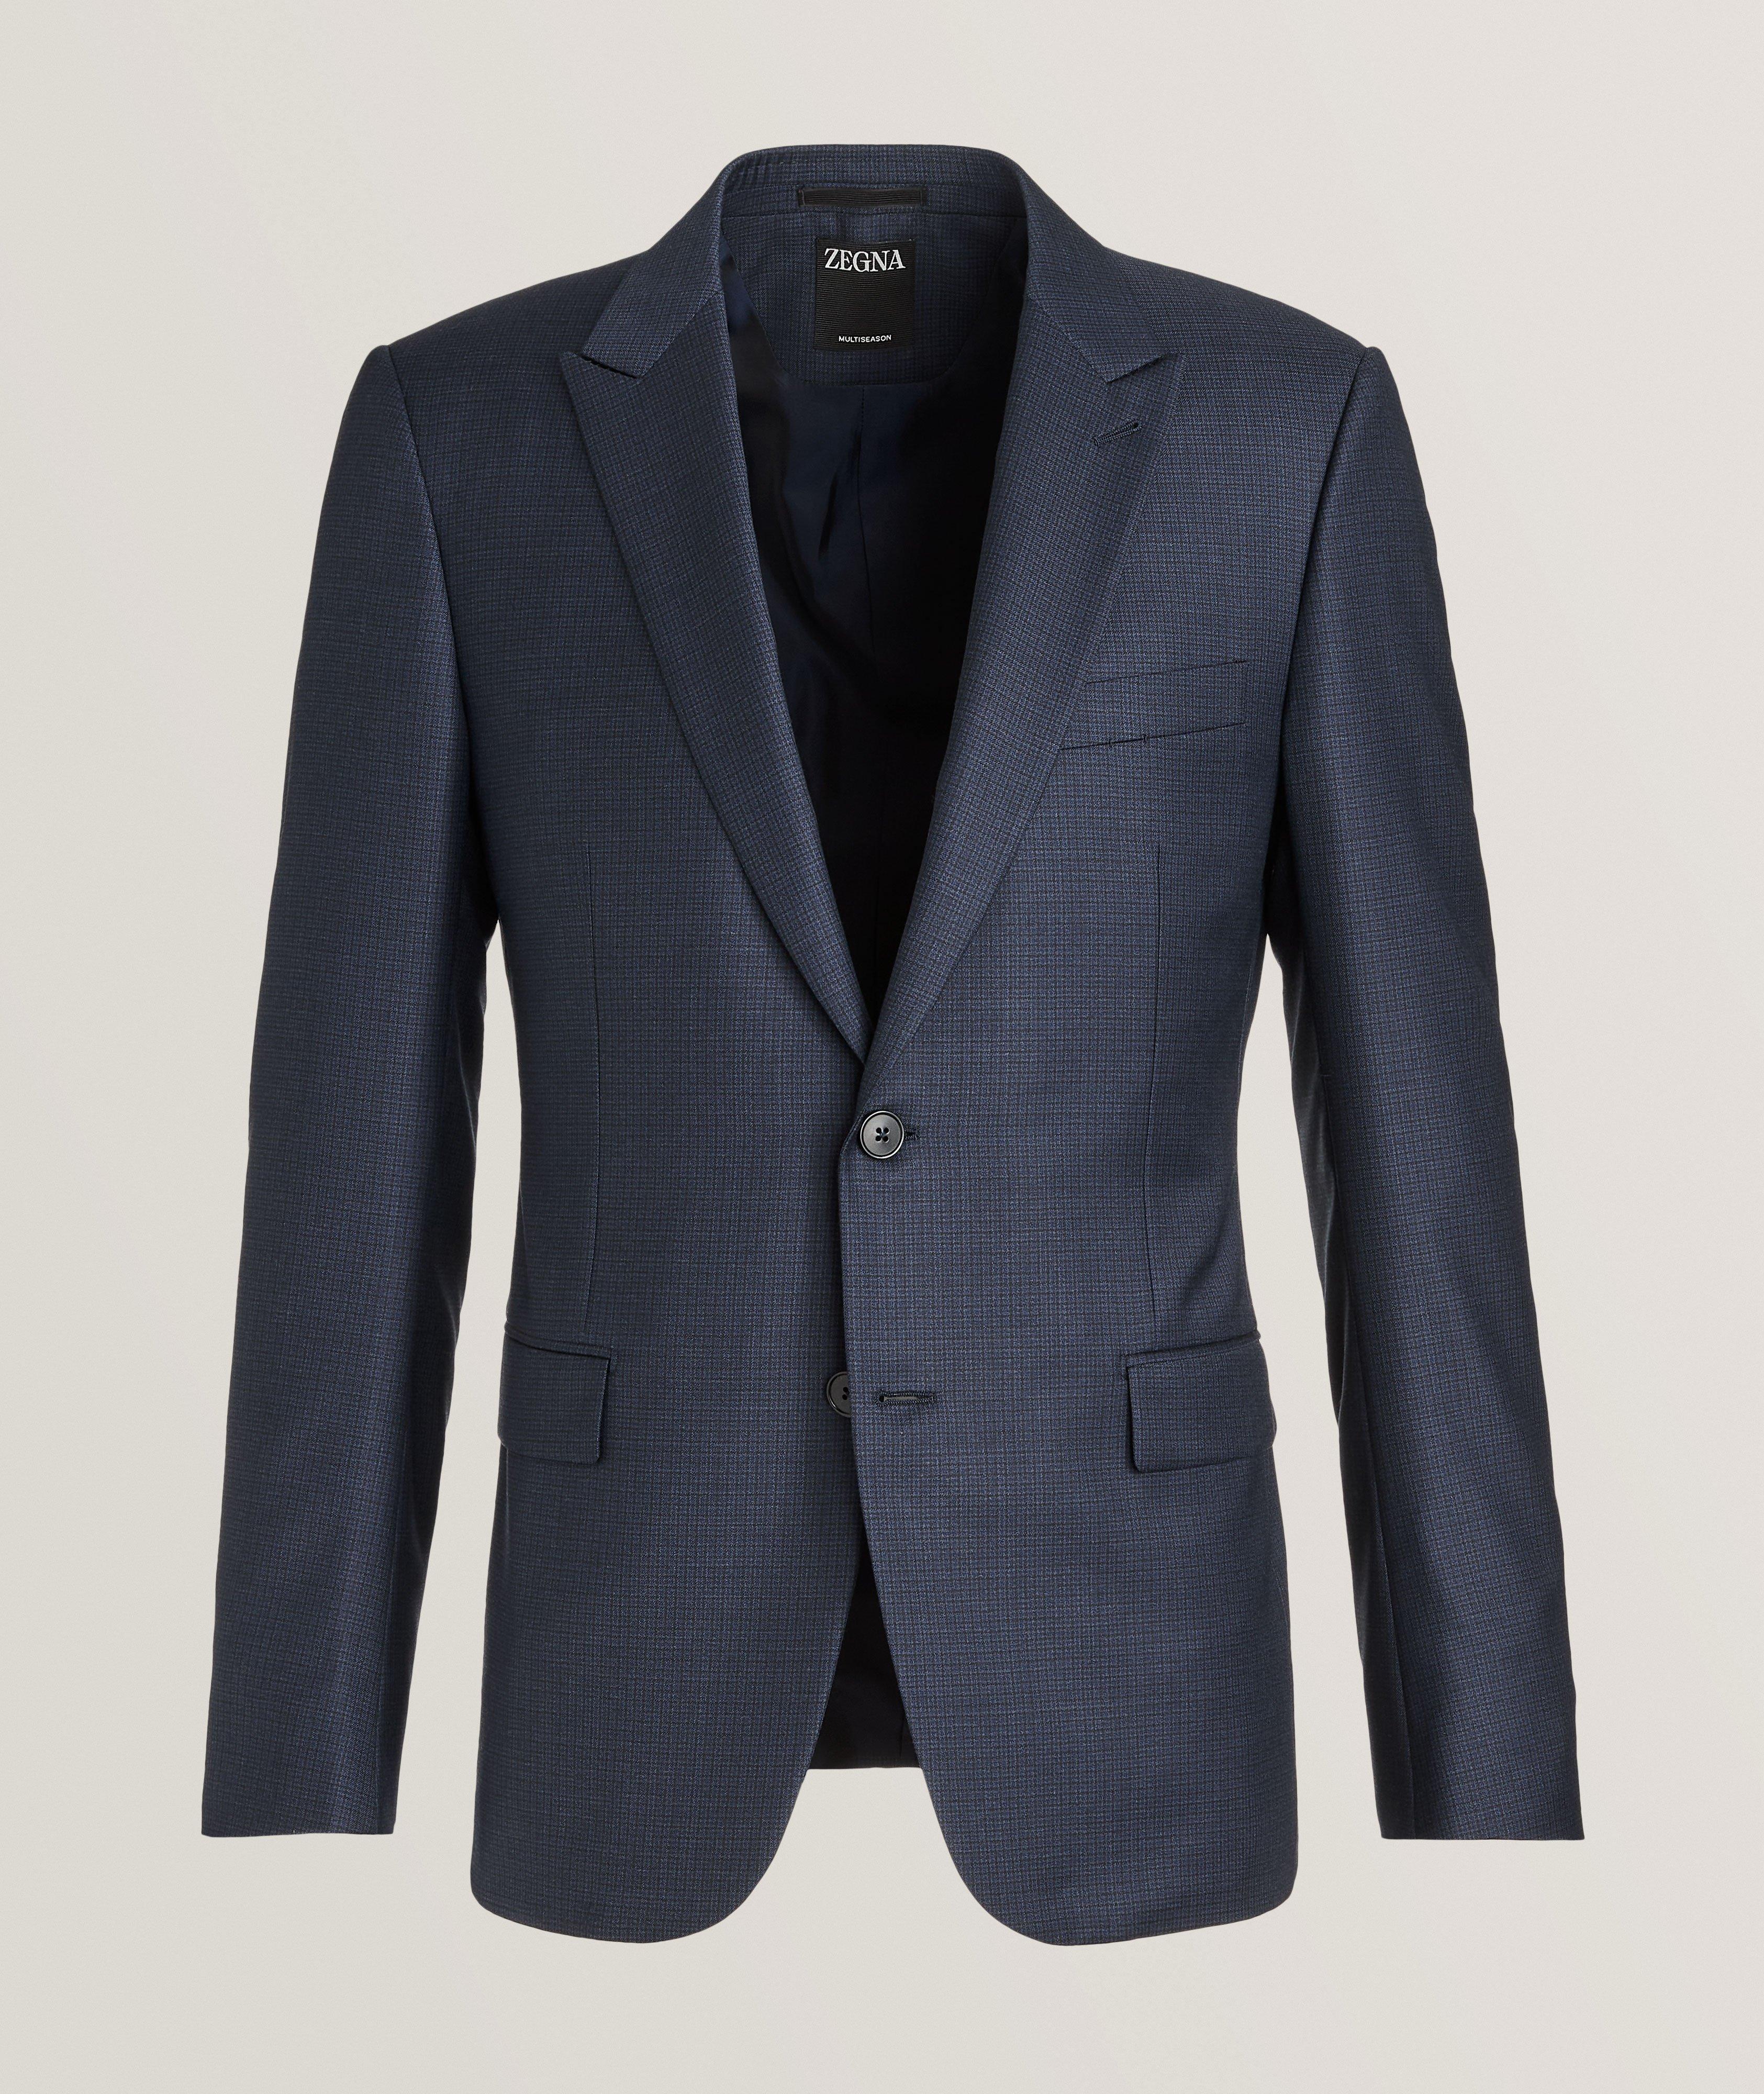 Zegna Fitted Multiseason Wool Miniature Houndstooth Suit | Suits ...